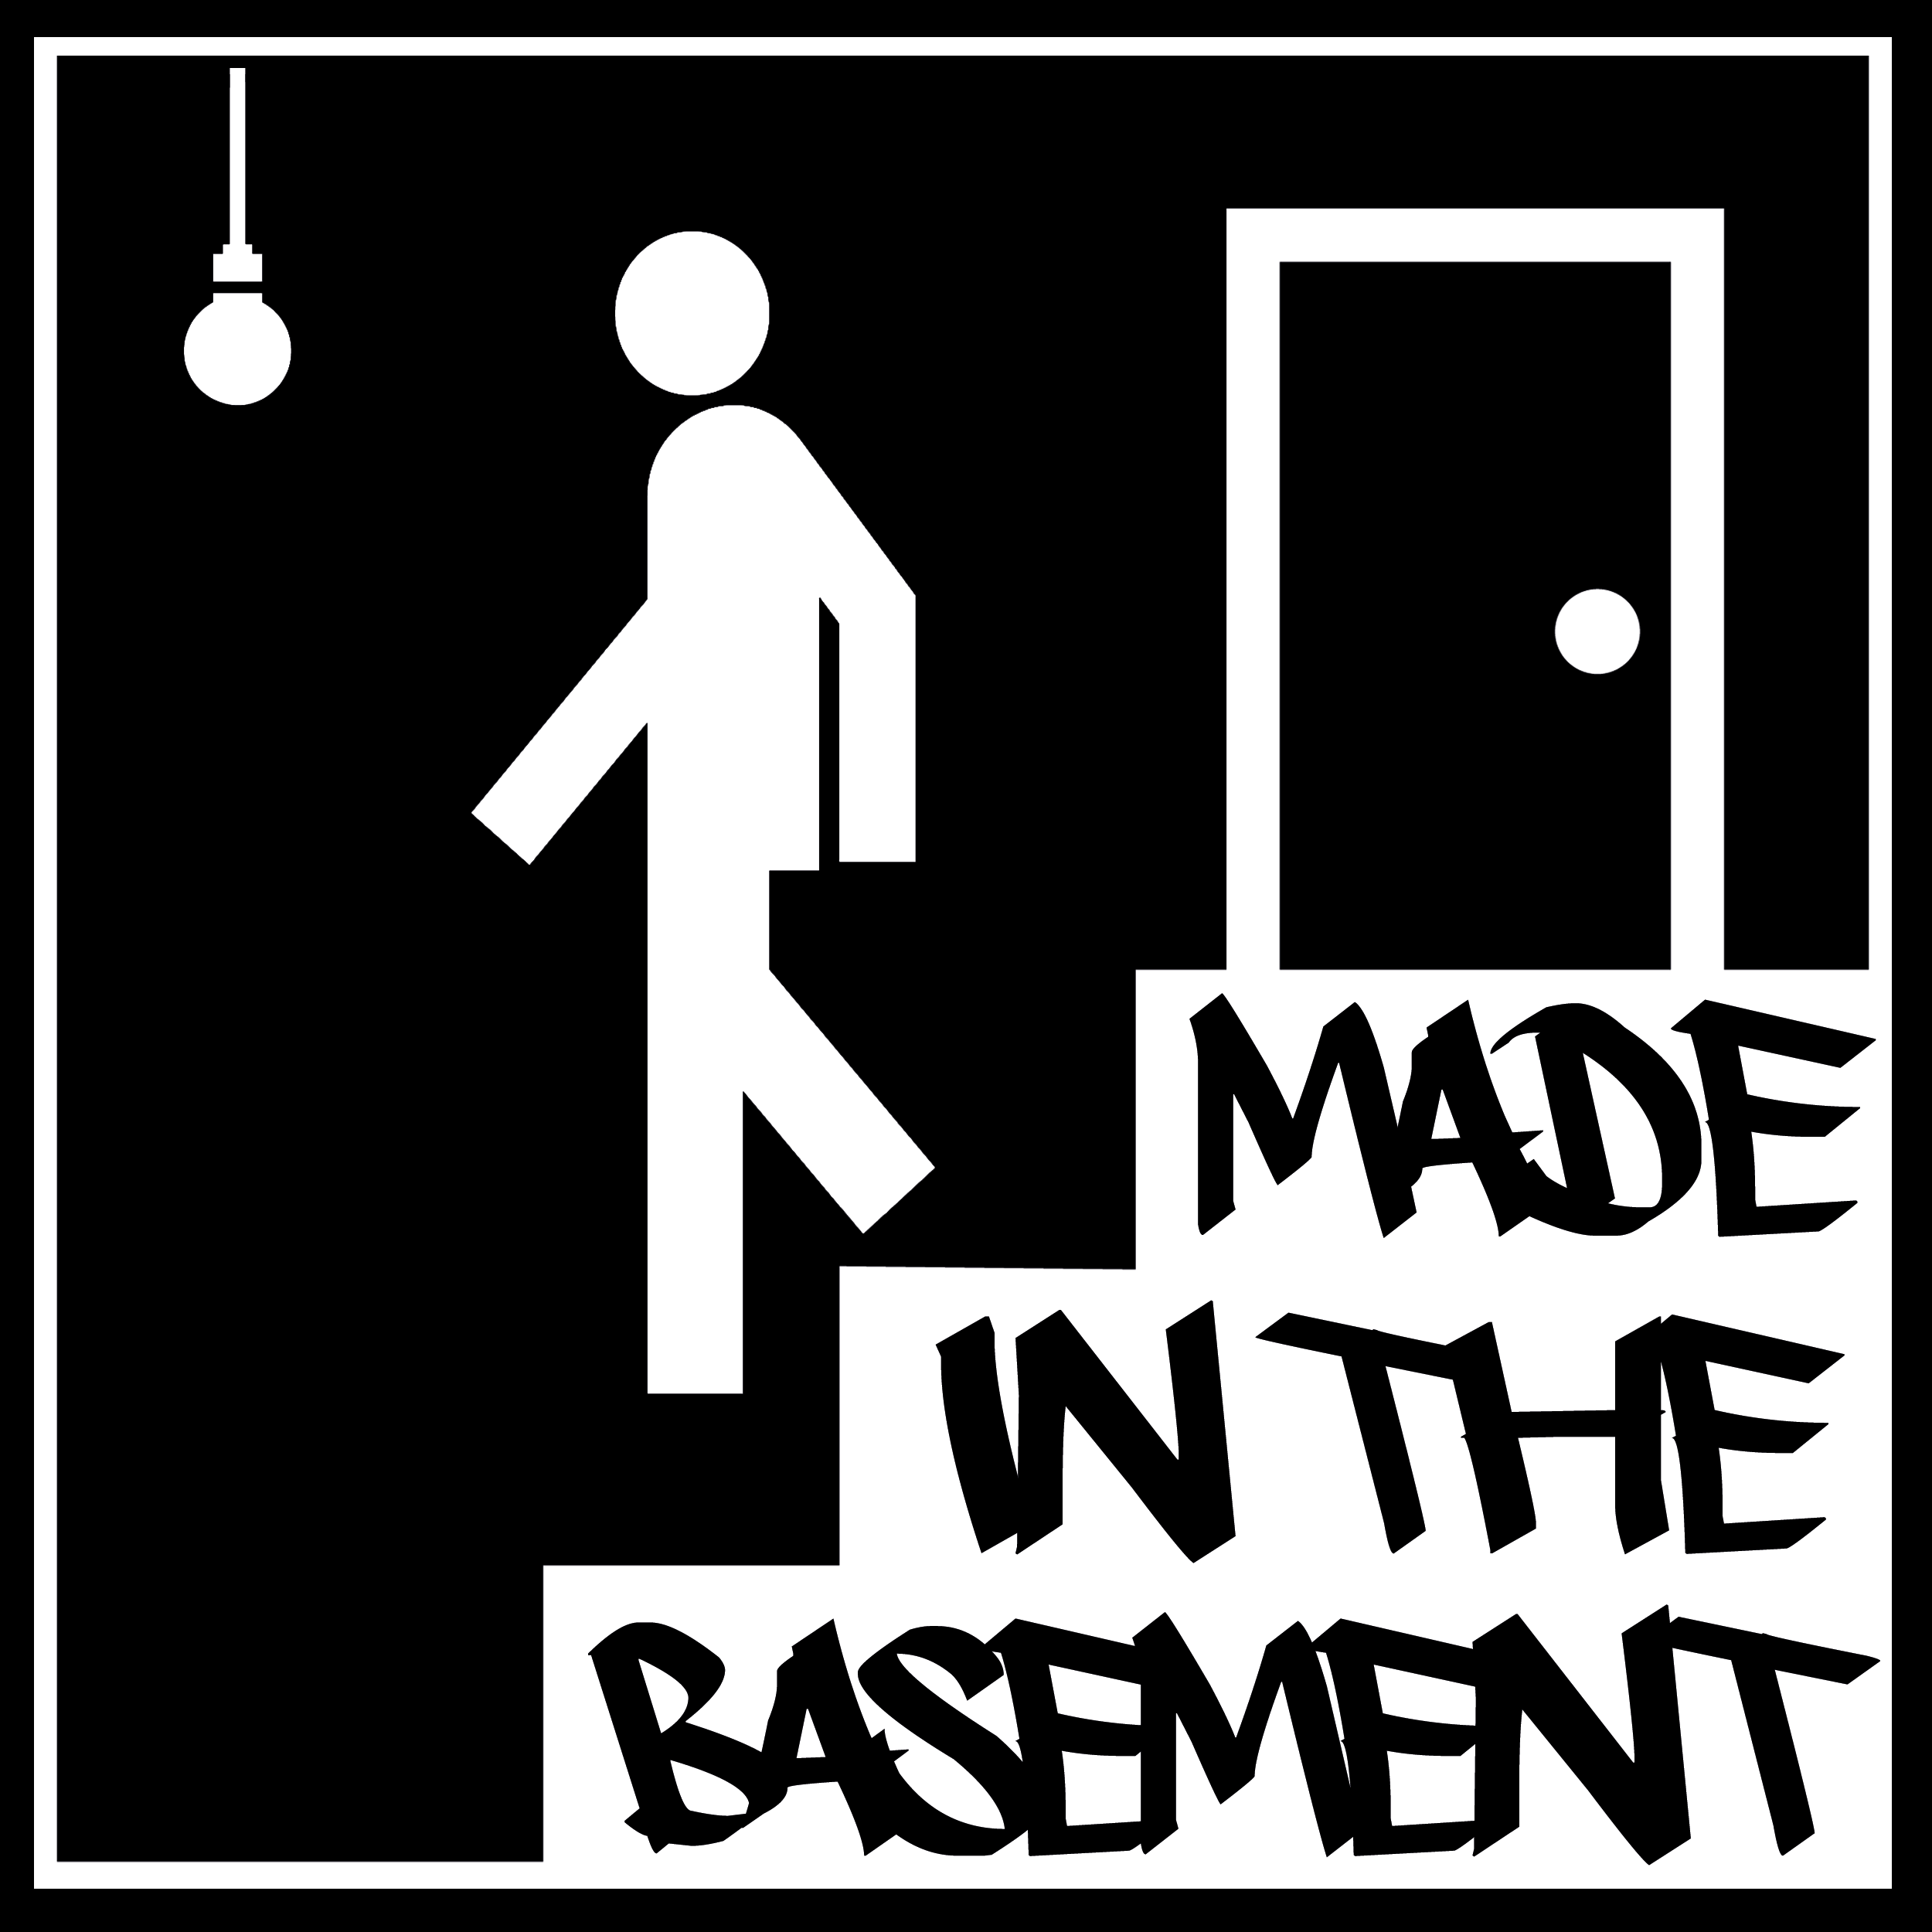 Made in the Basement